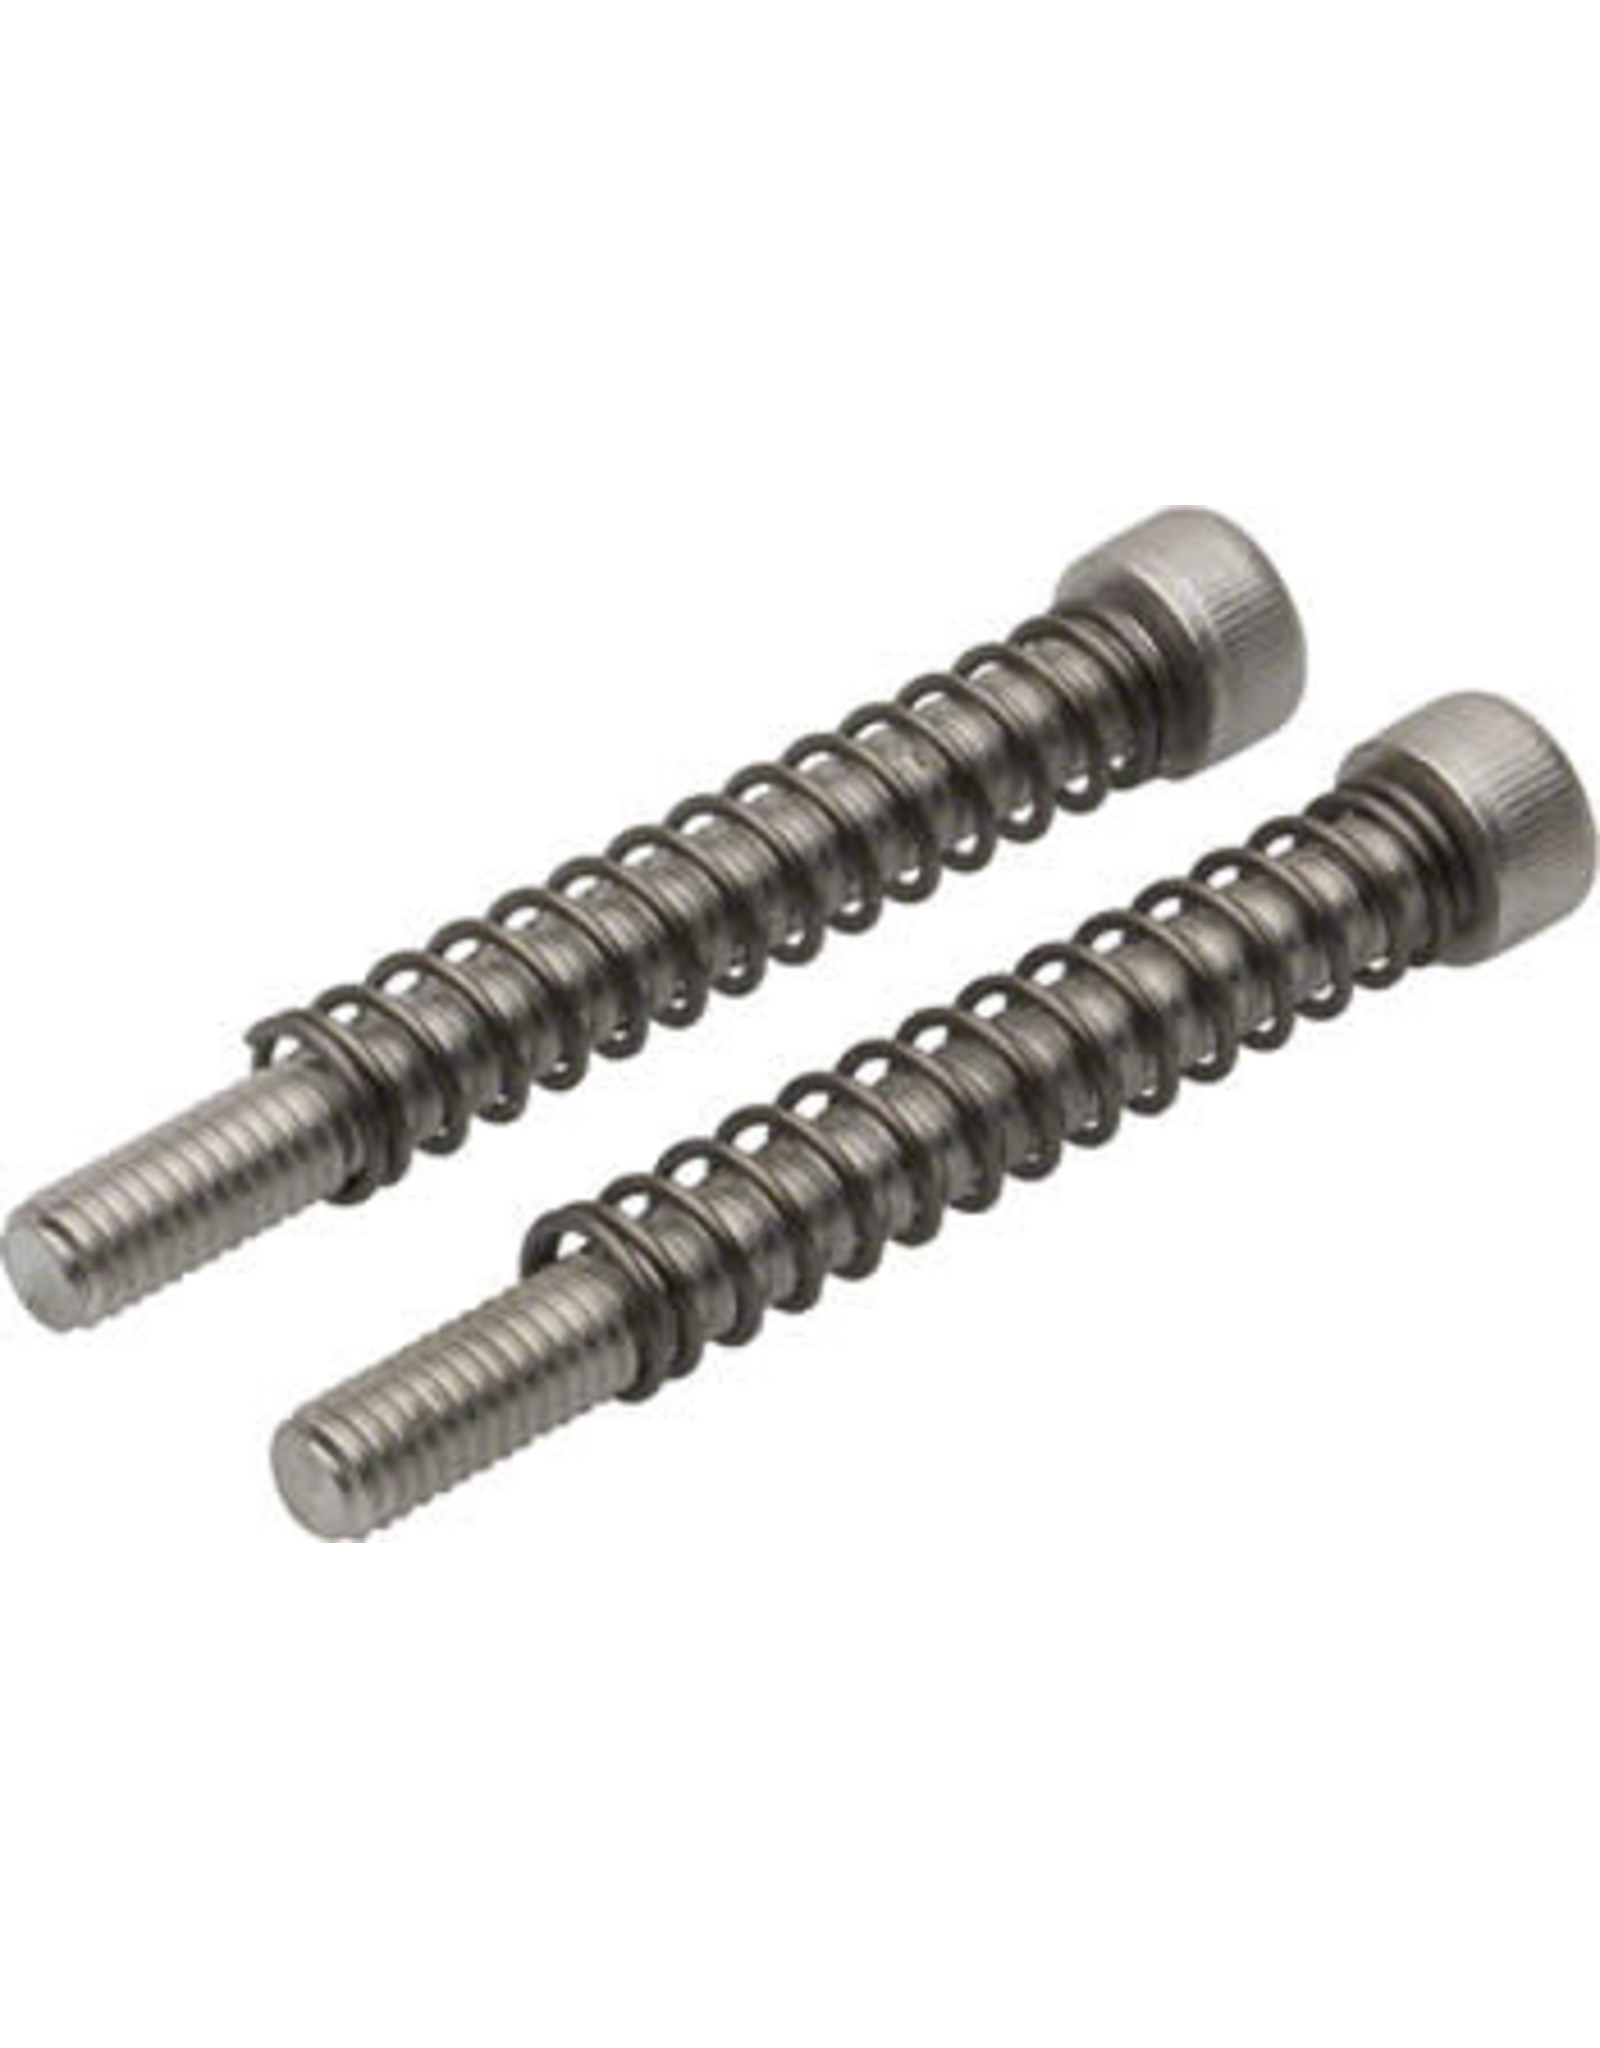 All-City All-City Adjustment Springs & Bolts for Track Dropouts